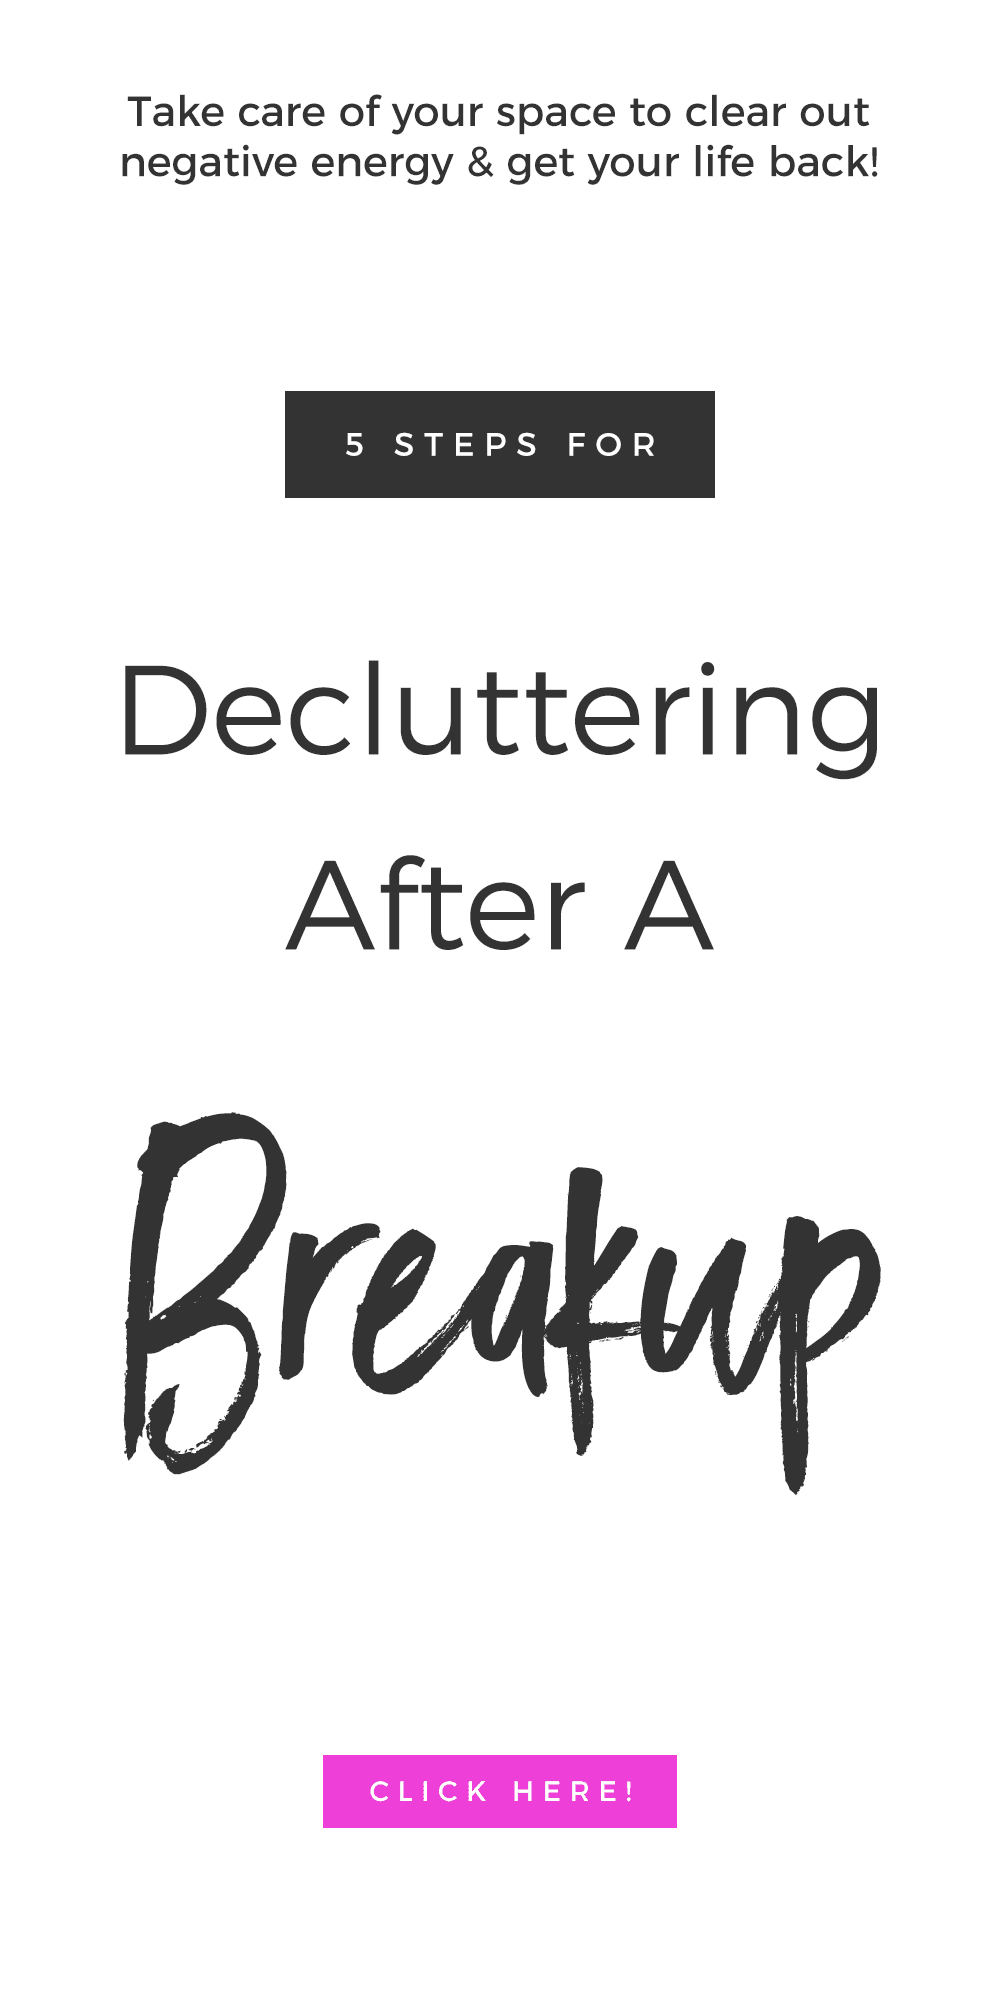 5 Steps For Decluttering After A Breakup